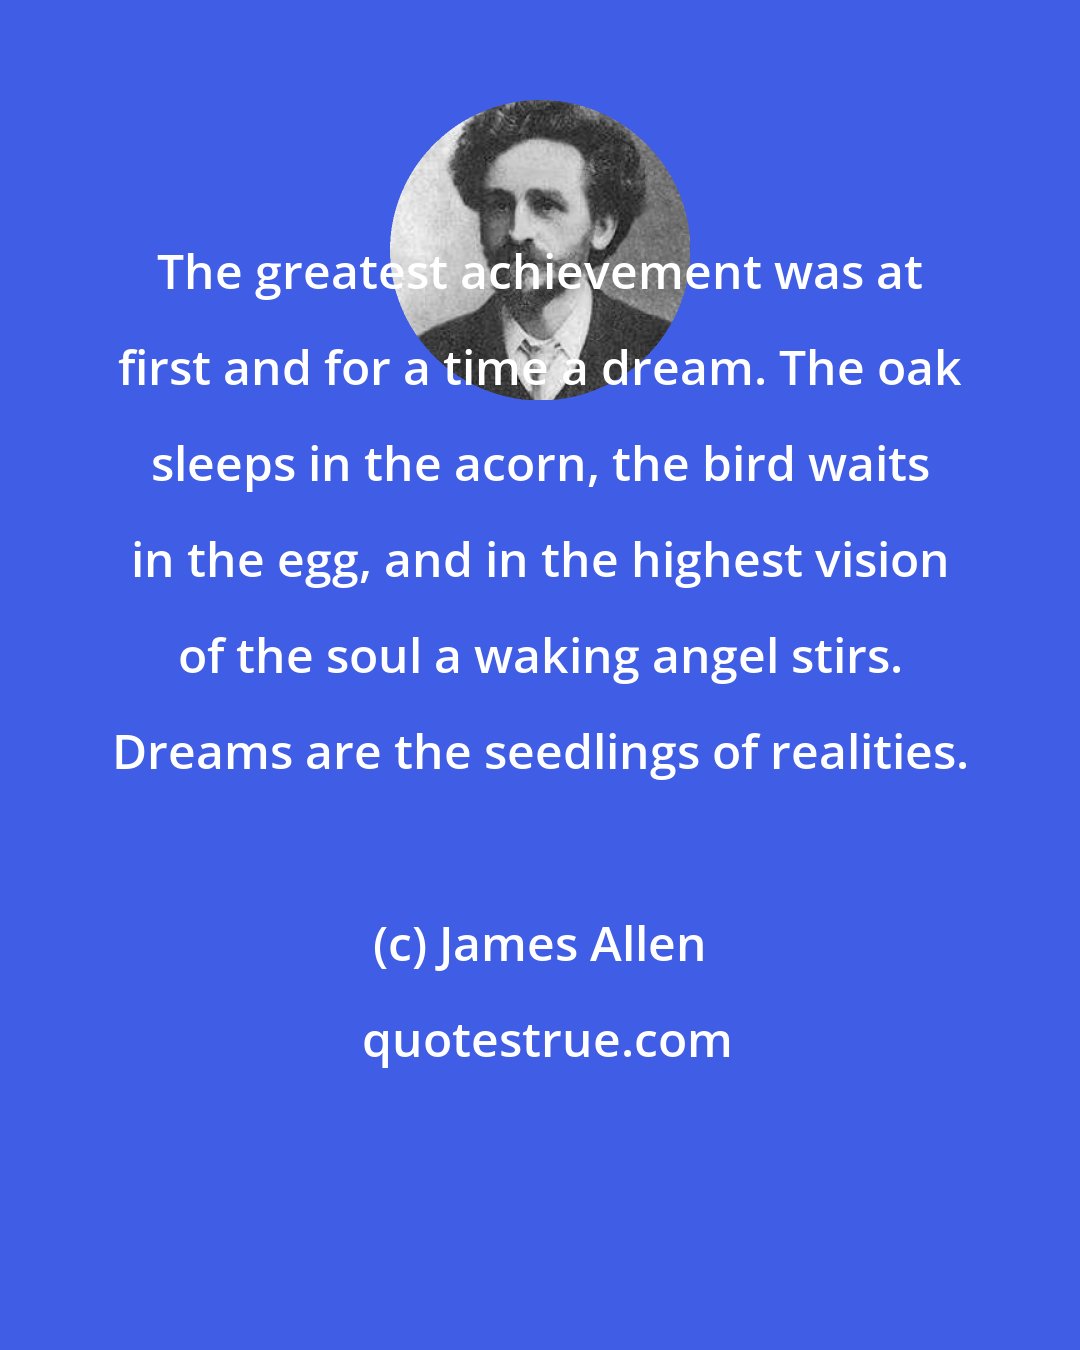 James Allen: The greatest achievement was at first and for a time a dream. The oak sleeps in the acorn, the bird waits in the egg, and in the highest vision of the soul a waking angel stirs. Dreams are the seedlings of realities.